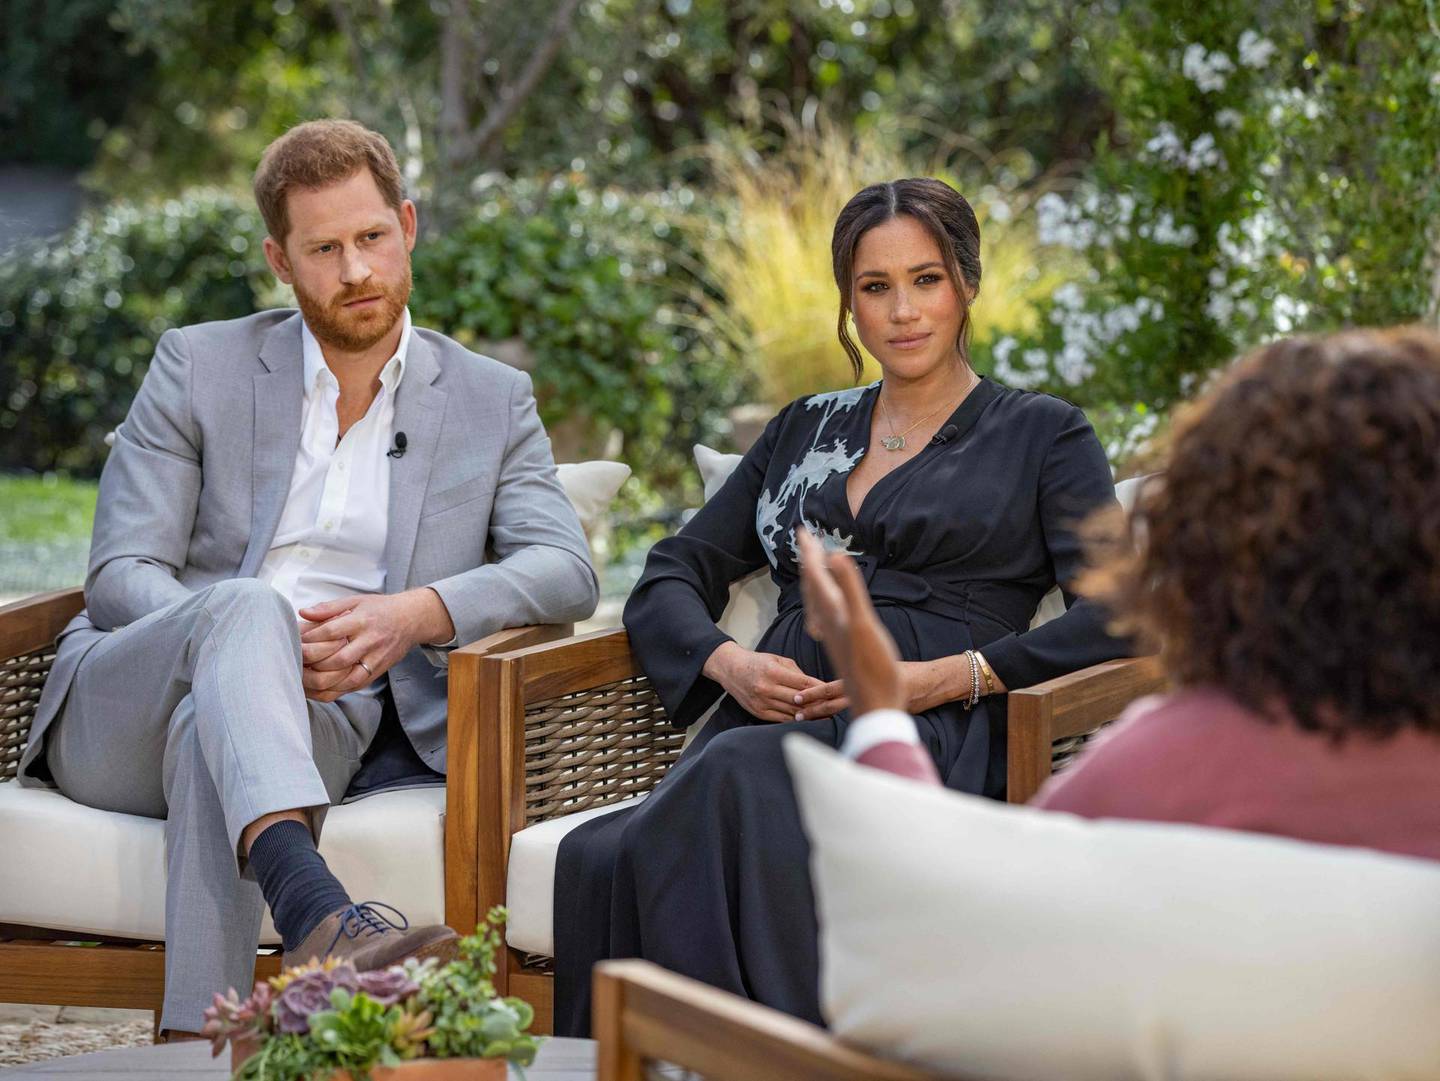 In this undated photo released by Harpo Productions on March 7, 2021, Britain's Prince Harry (L) and his wife Meghan, Duchess of Sussex (C) are shown in conversation with US TV host Oprah Winfrey.  Britain's royal family is bracing for further revelations from Prince Harry and his American wife Meghan on March 7, 2021, as a week of transatlantic claims and counterclaims culminates with the broadcast of an interview with Oprah Winfrey.  The two-hour interview with the US TV queen is the biggest royal news since Harry's mother, Princess Diana, revealed details of her 1995 marriage to his father, Prince Charles, which collapsed. 